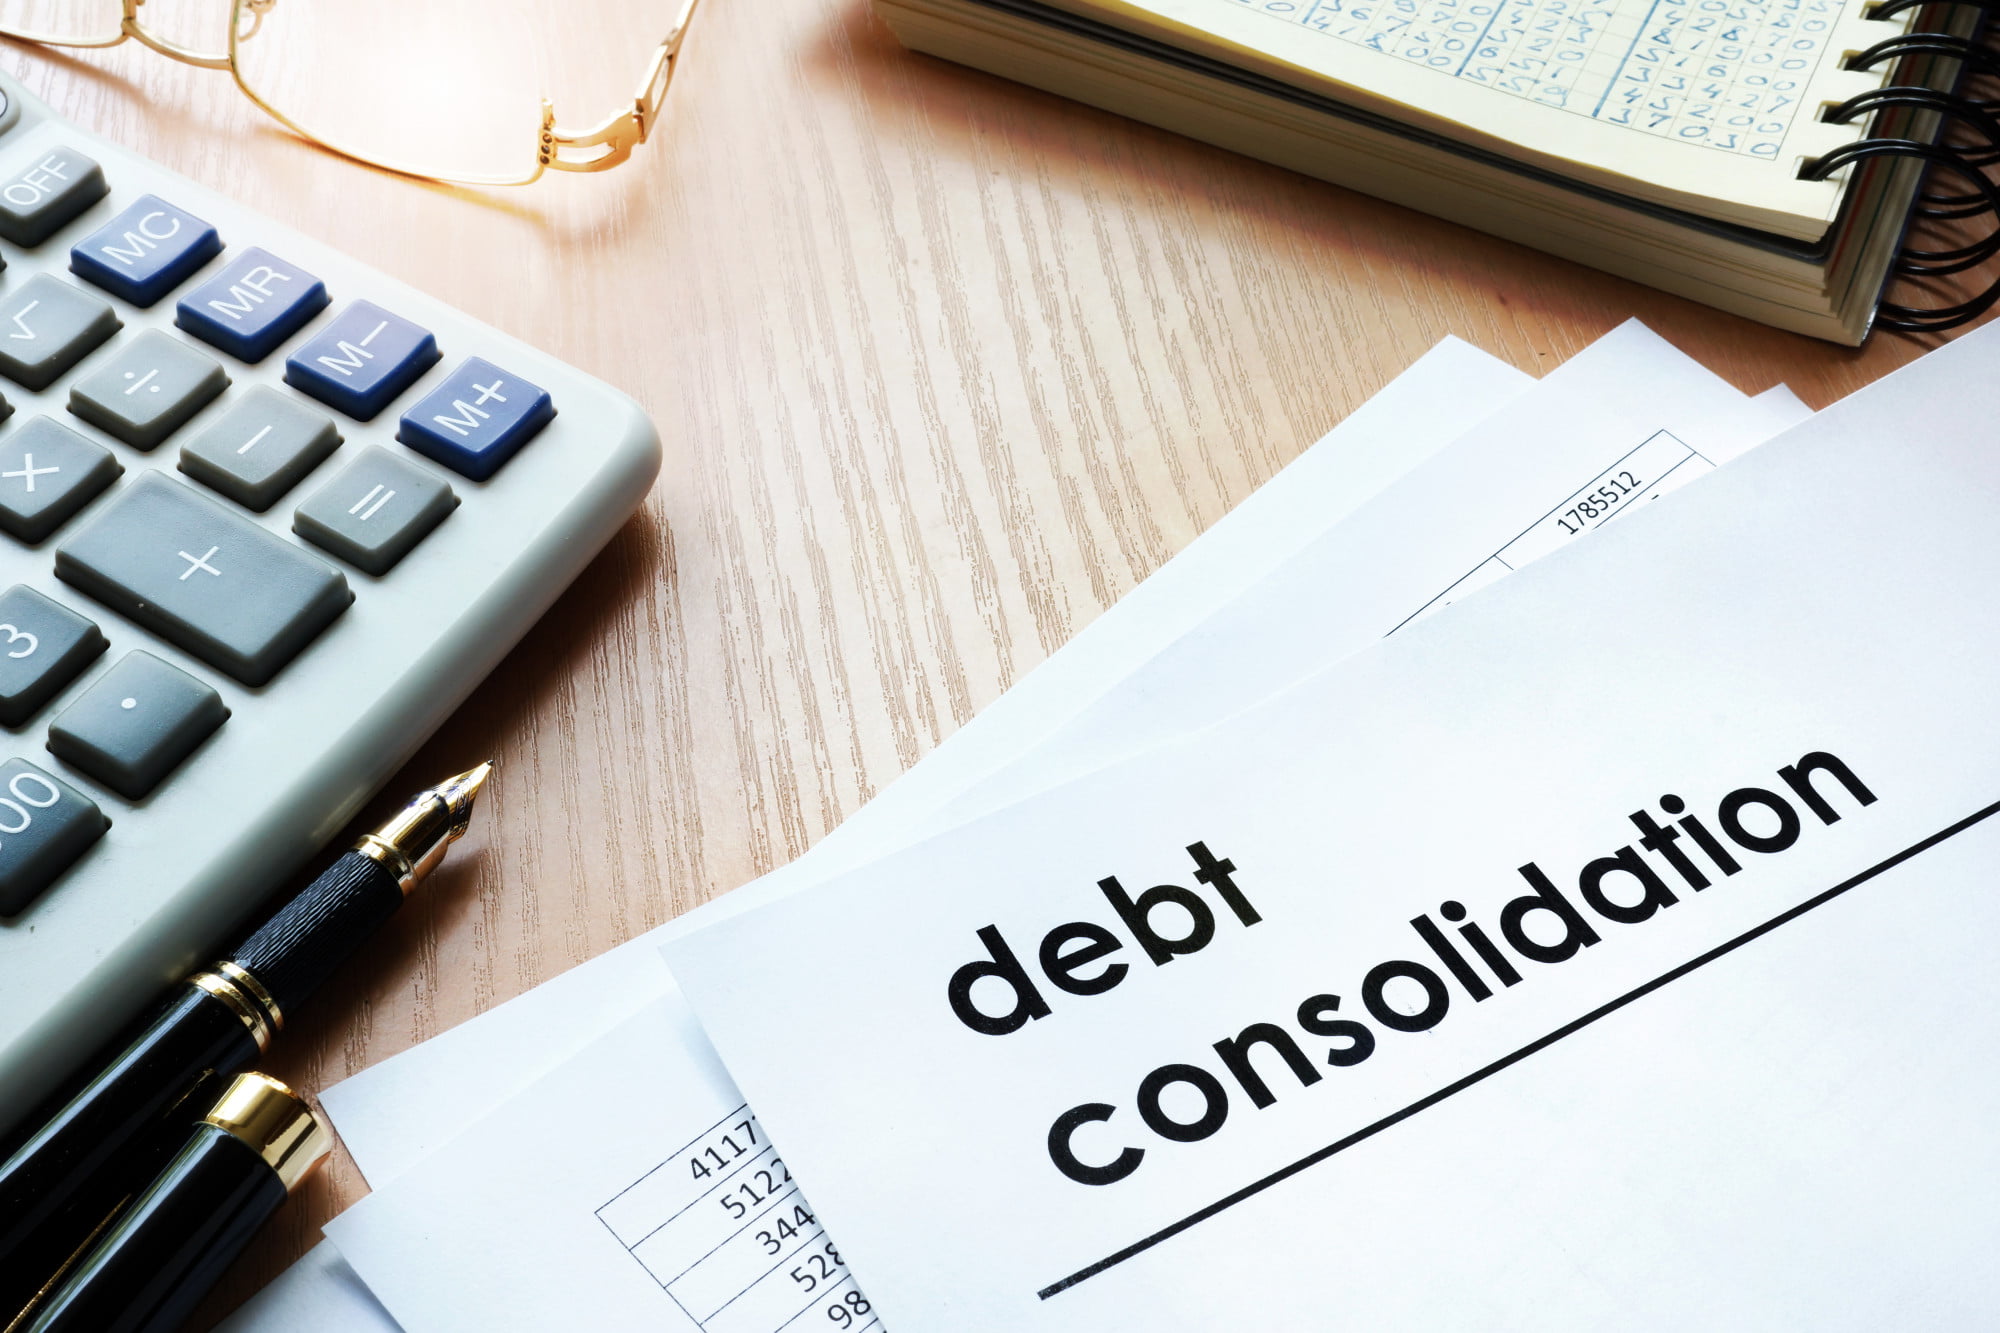 If your various debts are starting to overwhelm you, then you may want to consider a debt consolidation loan. This is how to consolidate debt with a loan.